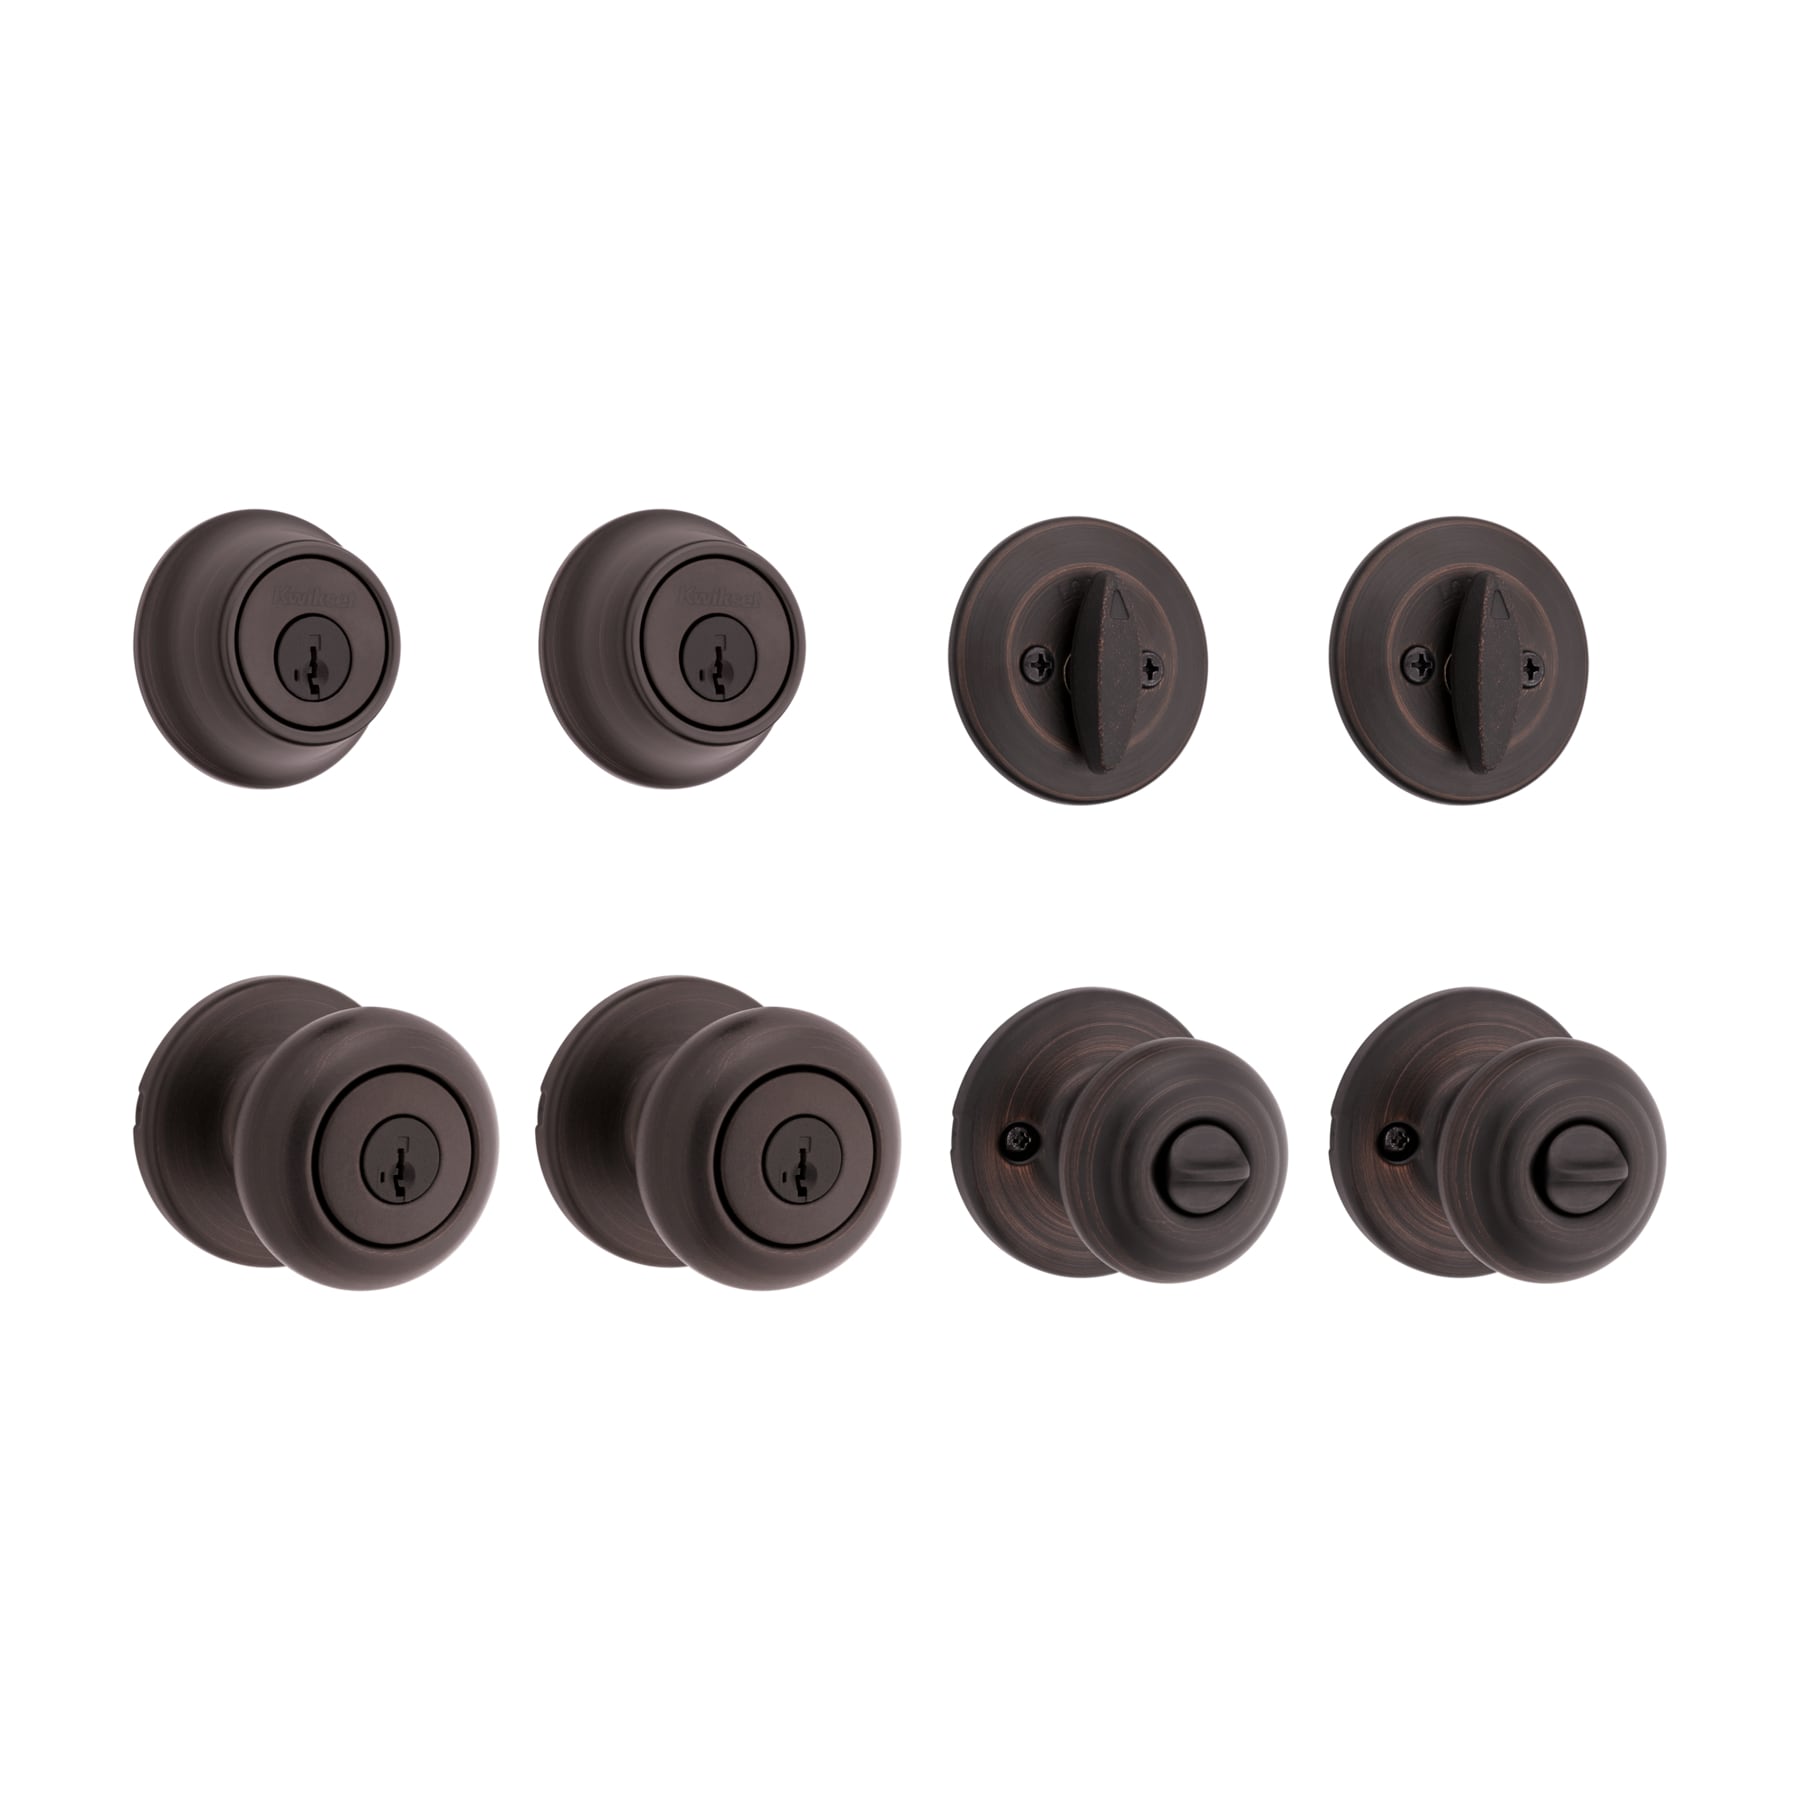 Oil-rubbed Door Knobs at Lowes.com